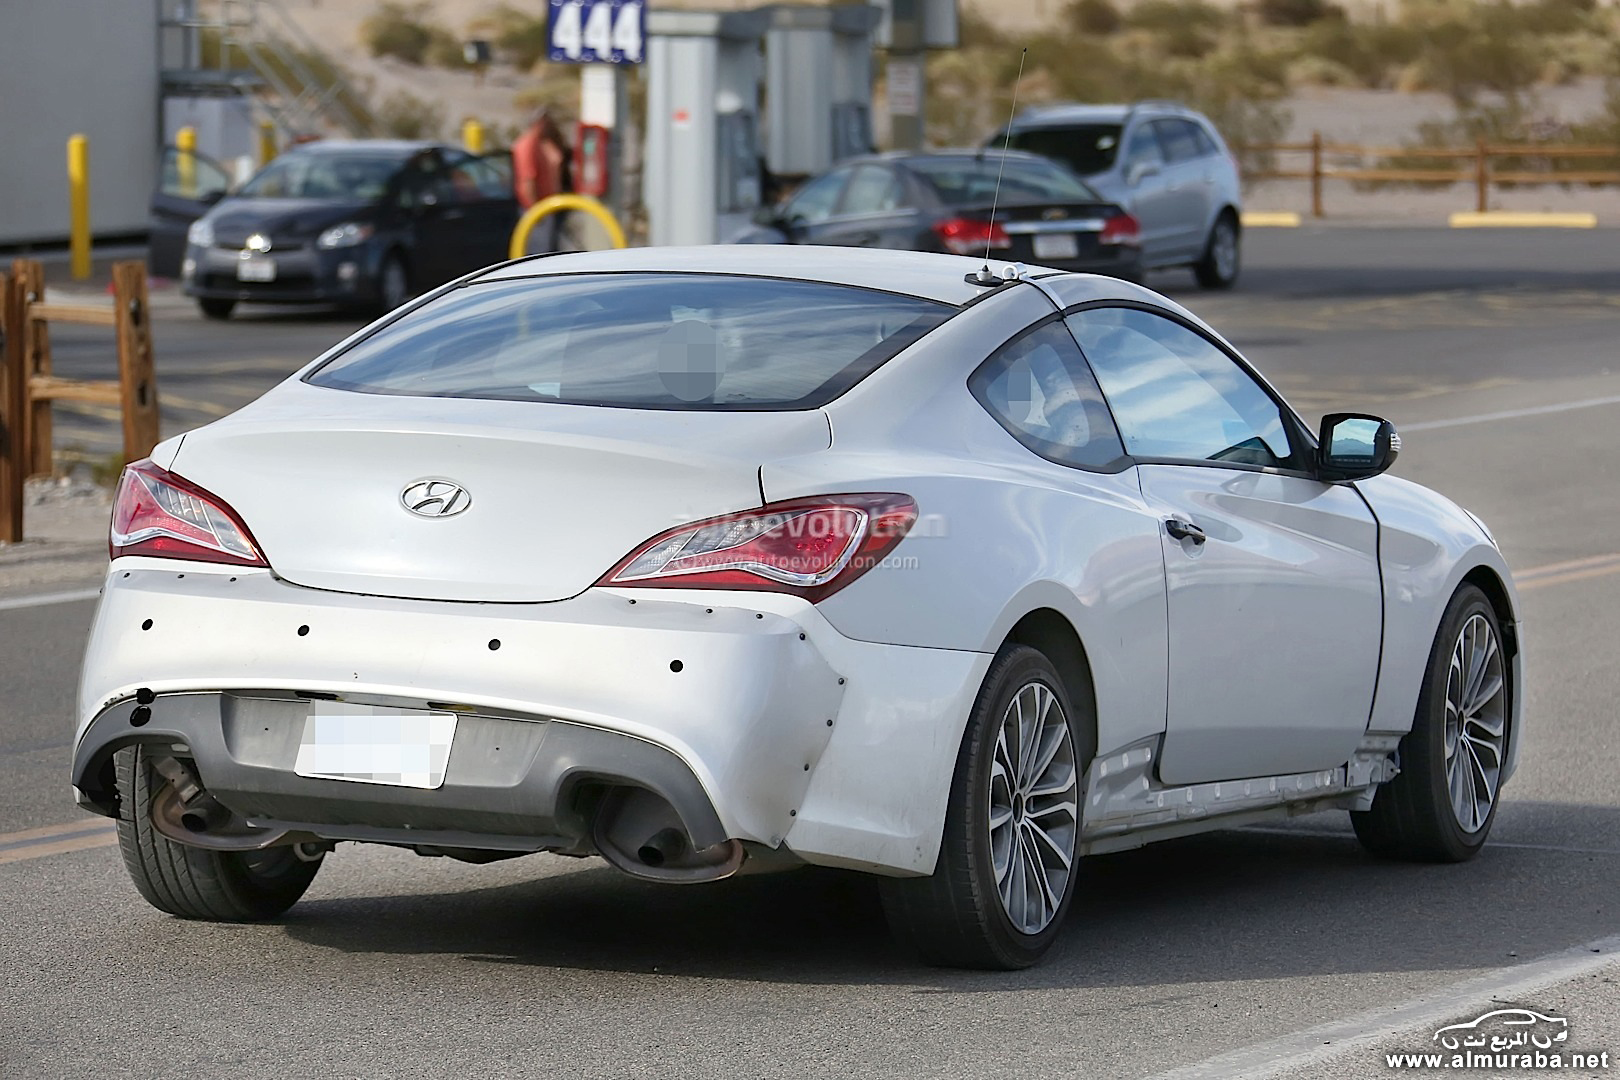 new-2017-hyundai-genesis-coupe-spied-for-the-first-time_9